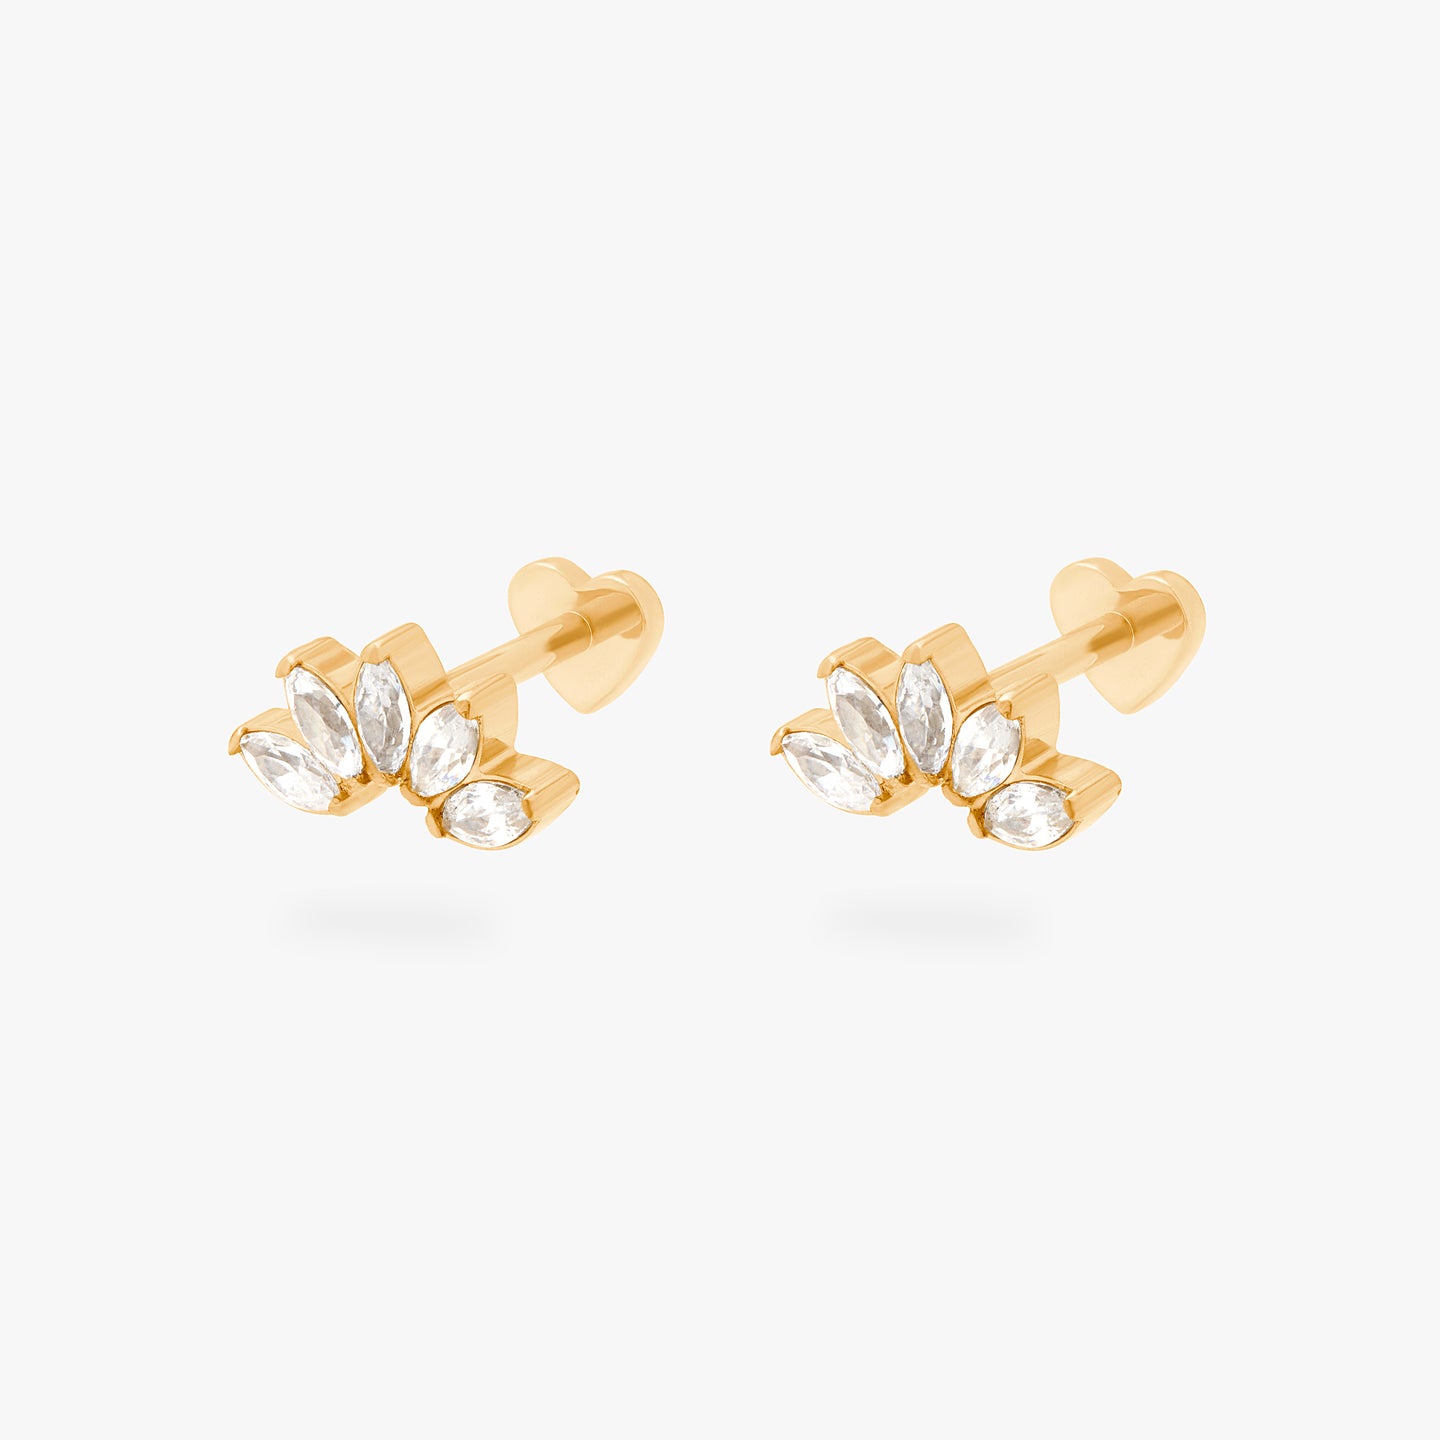 This is an image of a pair of gold/clear crown shaped flatback tops that have 5 marquise shaped CZs and heart-shaped gold flatback posts. [pair] color:null|gold/clear